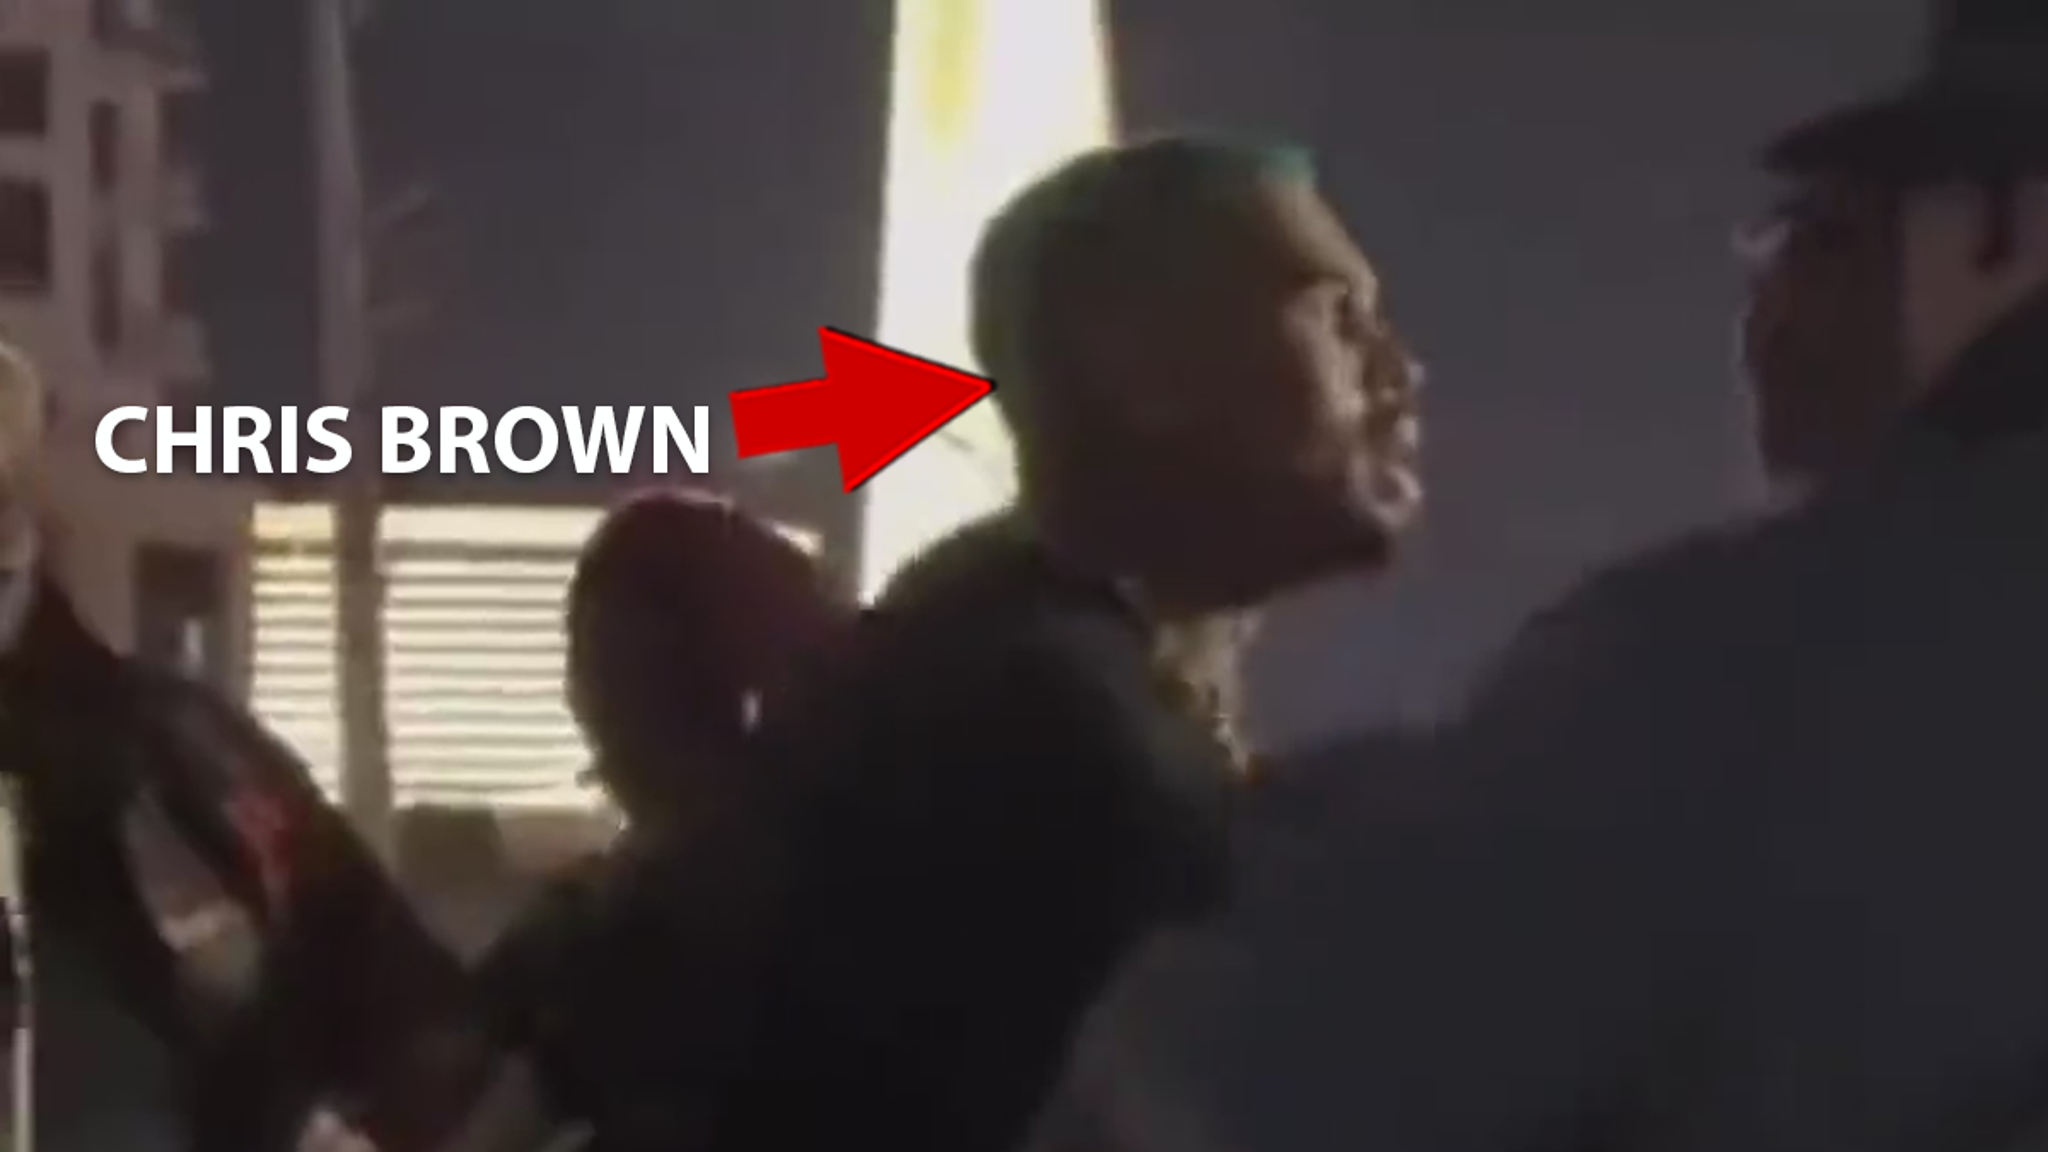 Chris Brown Involved in Another Confrontation After Usher Incident